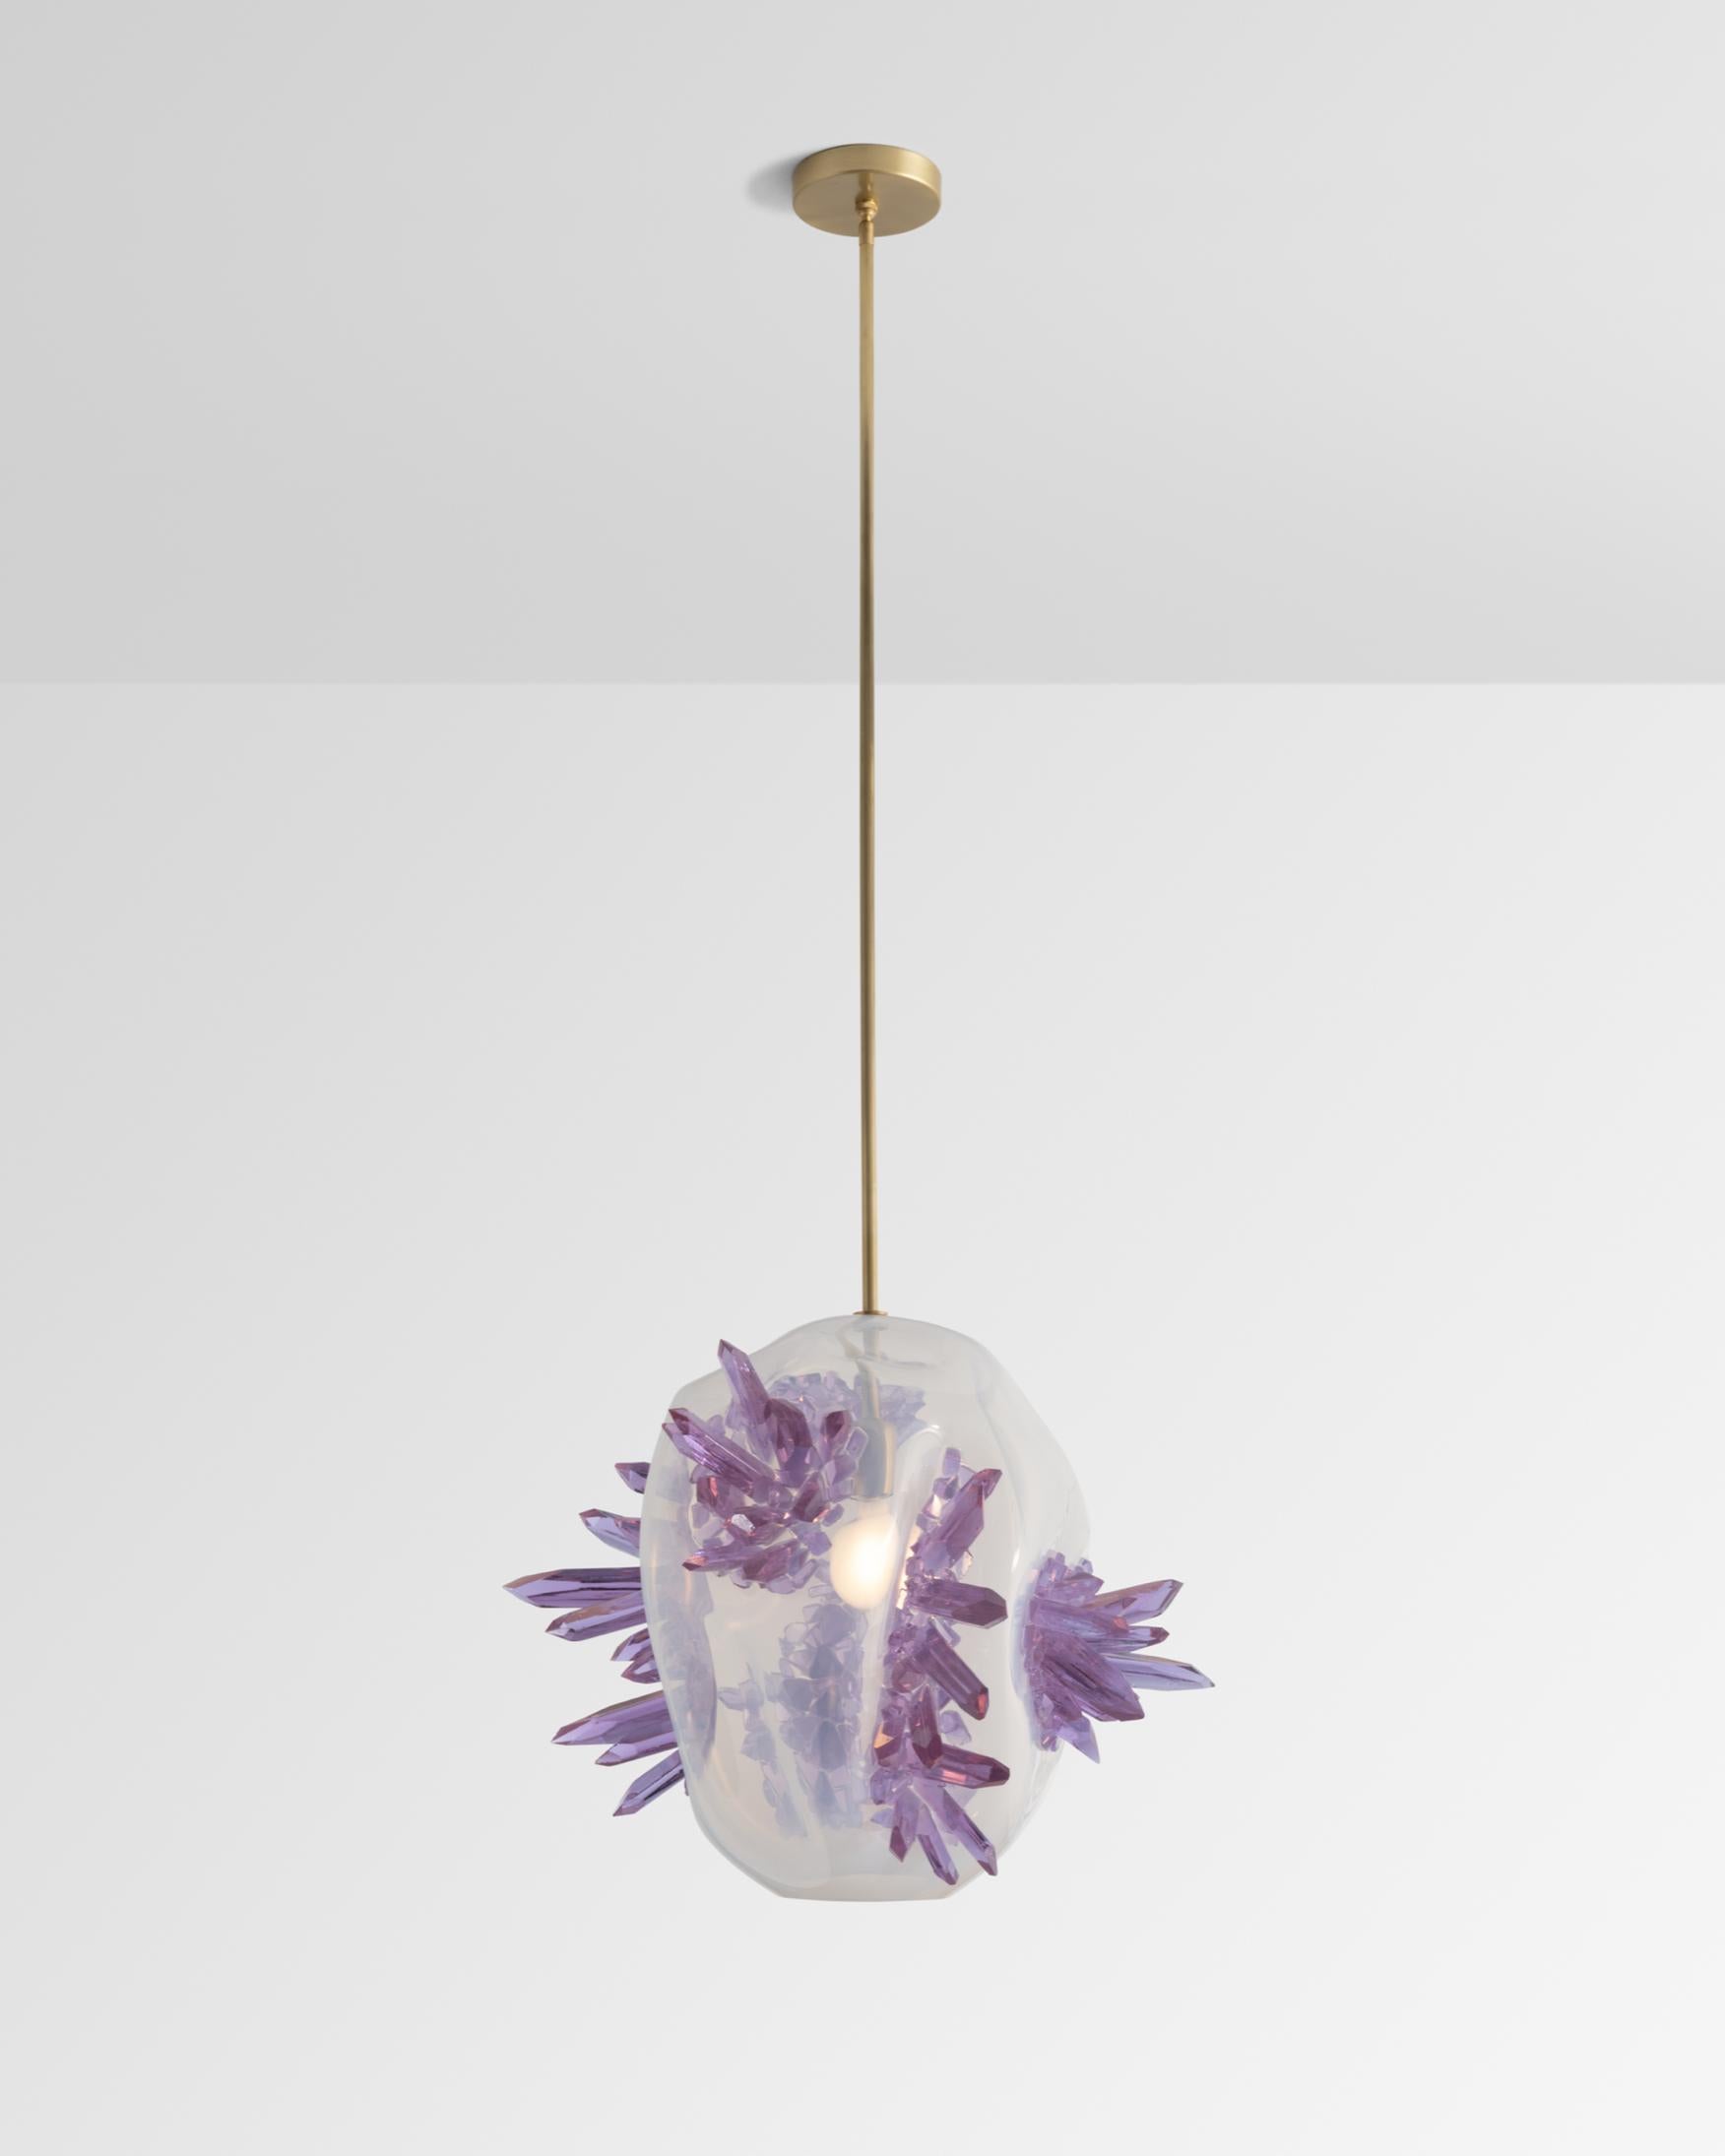 Unique hanging pendant in blown glass, with applied glass crystals. Designed and made by Jeff Zimmerman, USA, 2022. Dark Blue Glass with purple crystals shapes.